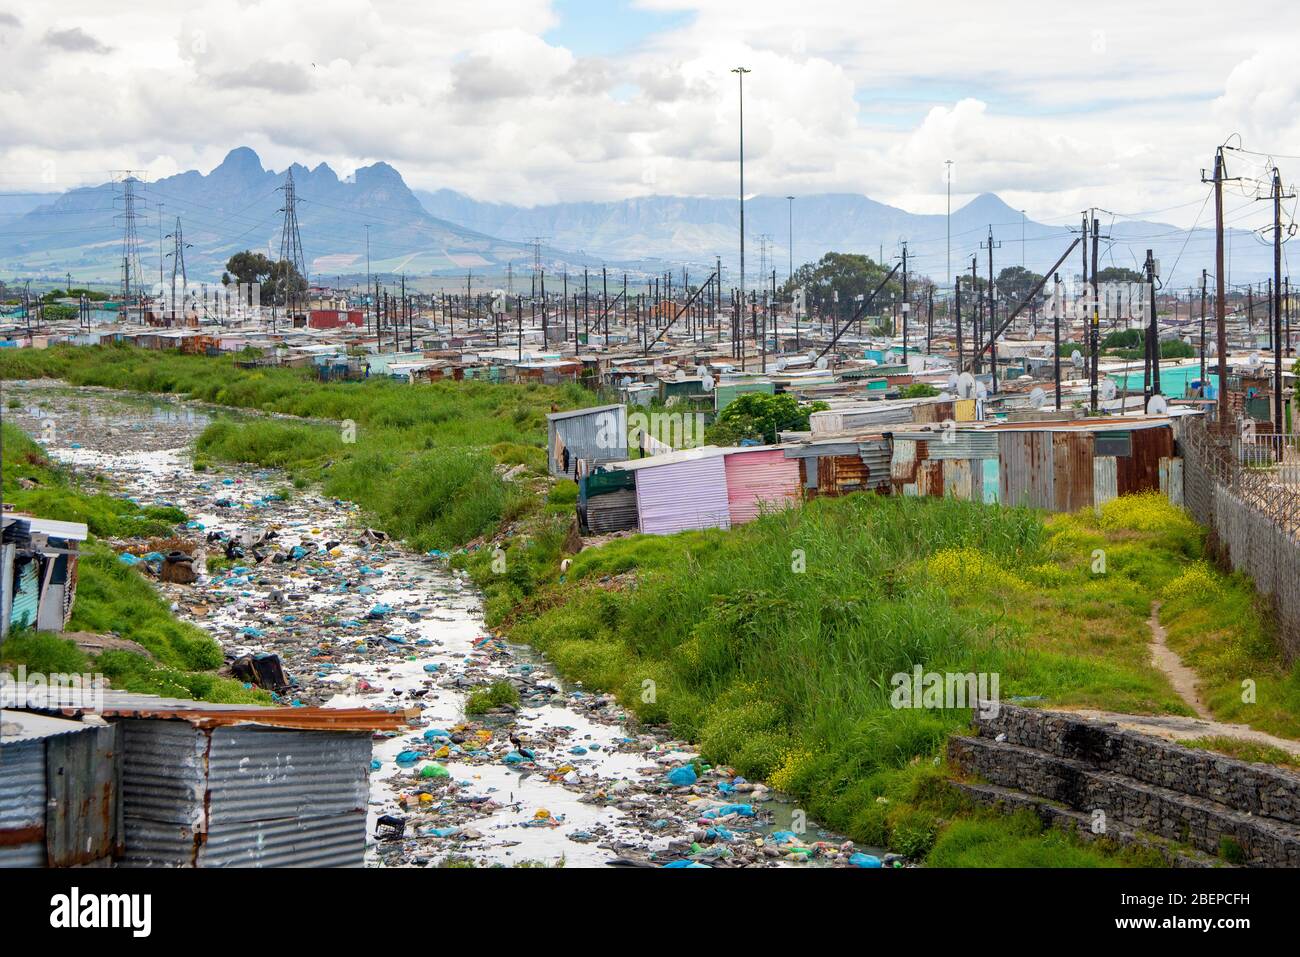 A river is full of plastic and other rubbish as it runs through a township in Cape Town. The polluted river is in the Khayelitsha slum. The area contrasts with the lush countryside in the background. No effort appears  to be made to clear the river. Stock Photo